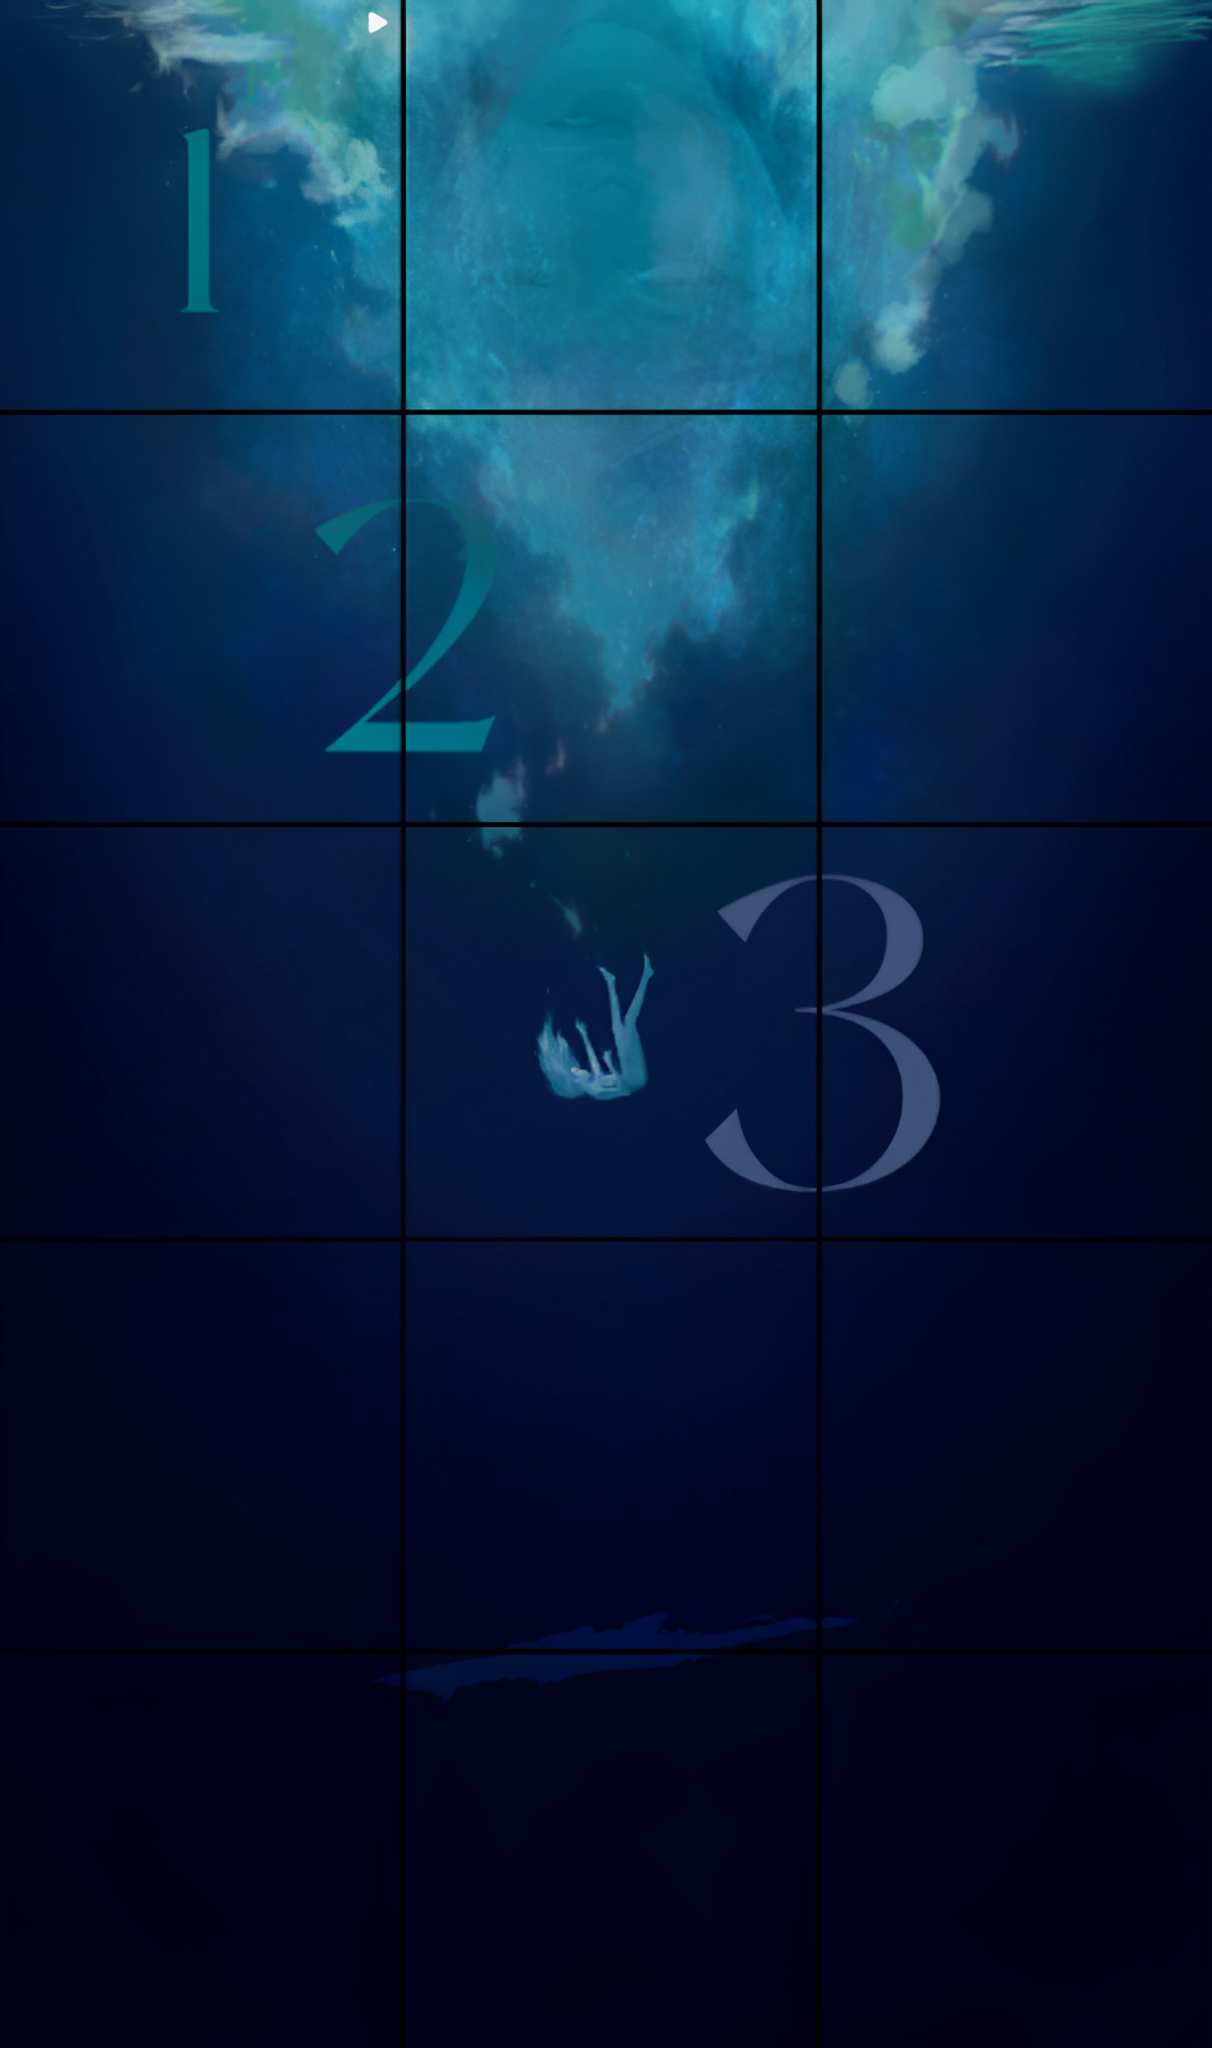 A series of 3 posts each day showing the gradual visual of a woman falling deeper into the ocean was shown alongside a numbered countdown.